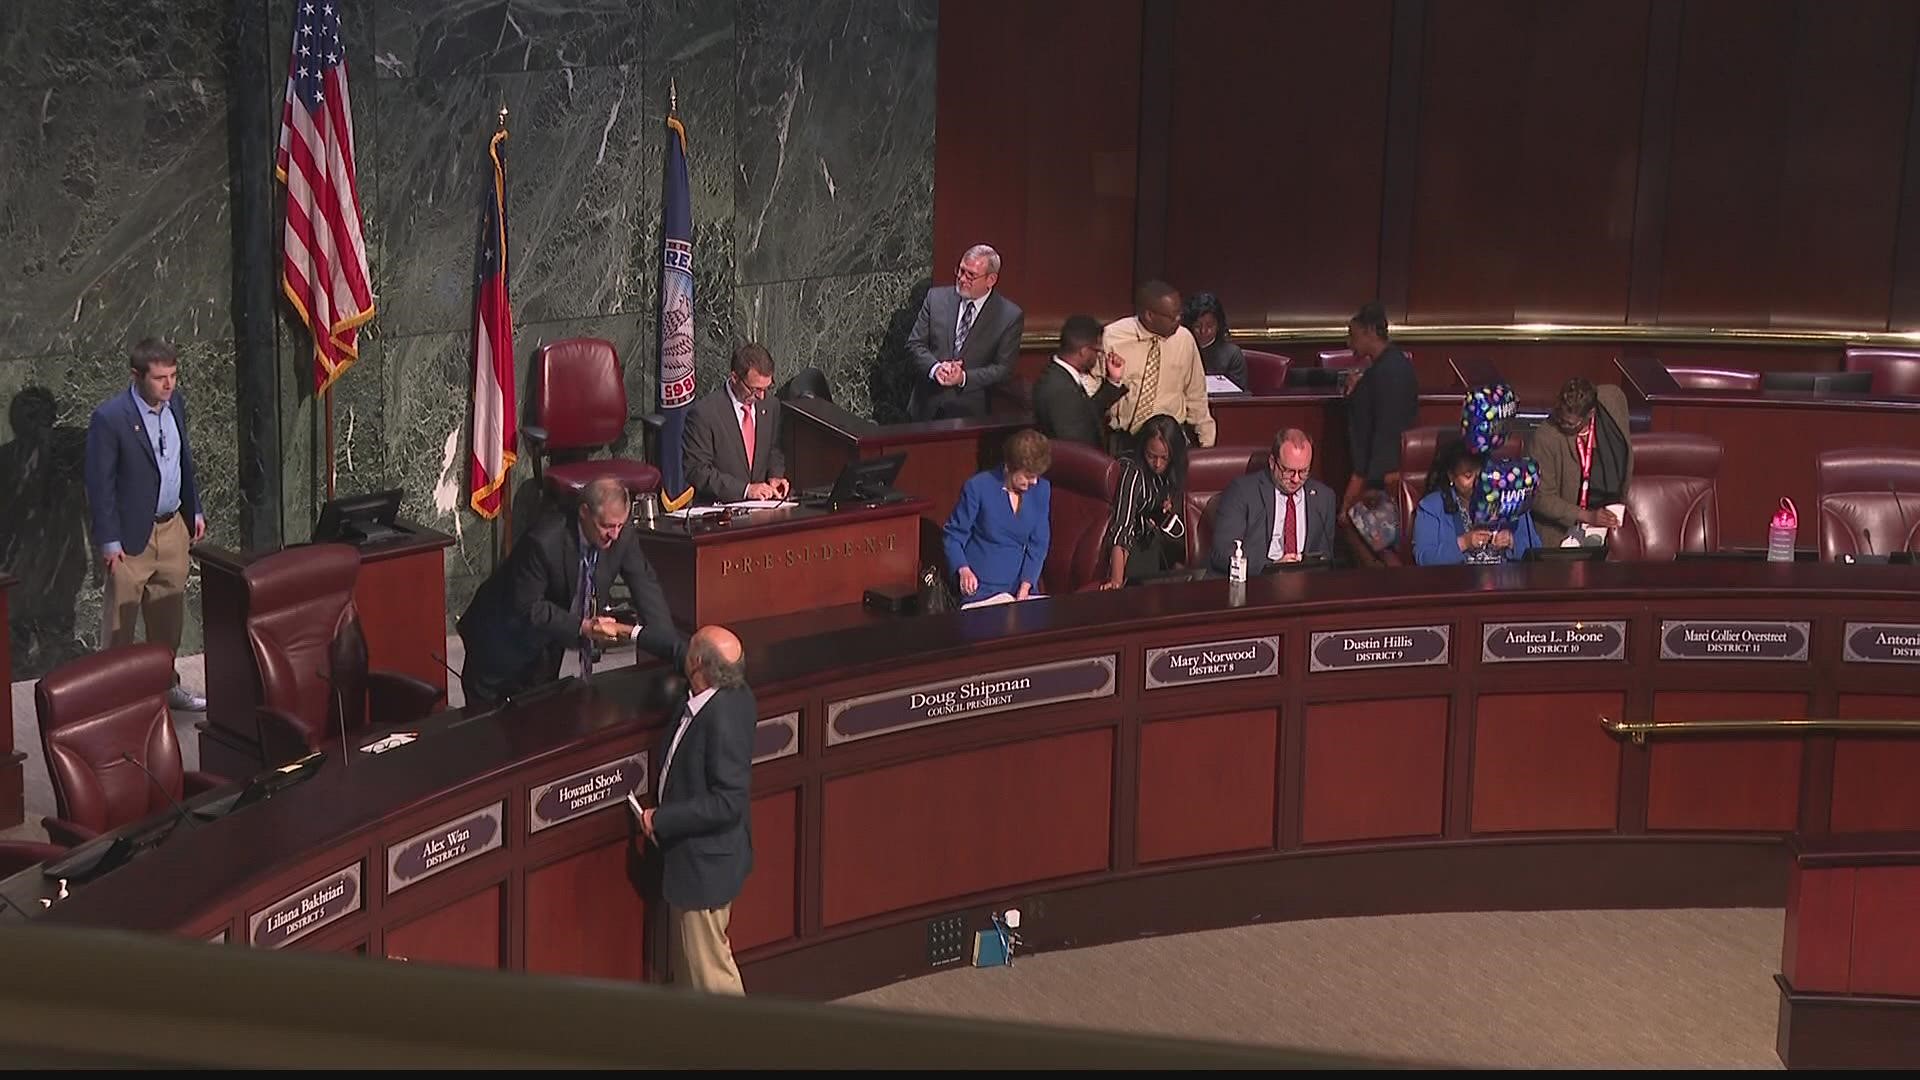 Atlanta City Council is tabling a decision on whether to set term limits for its members.